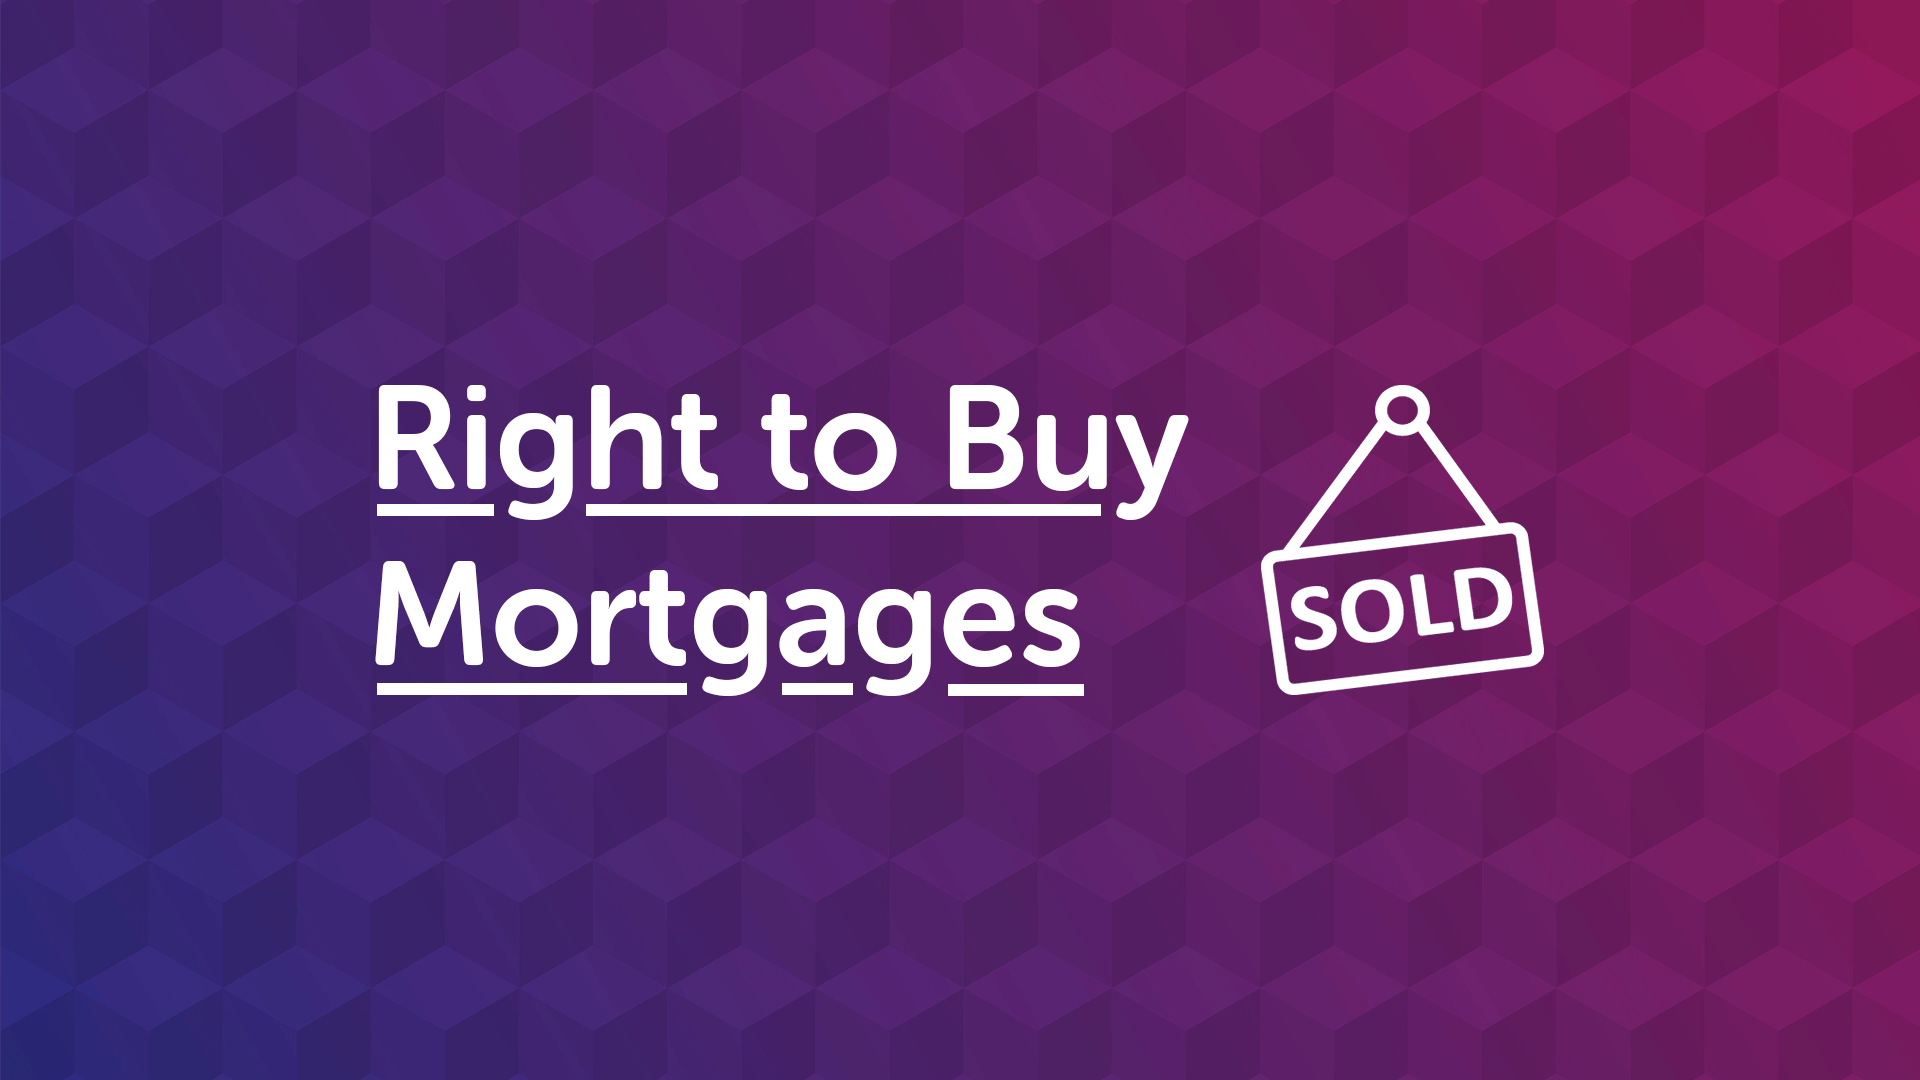 Right to Buy Mortgages